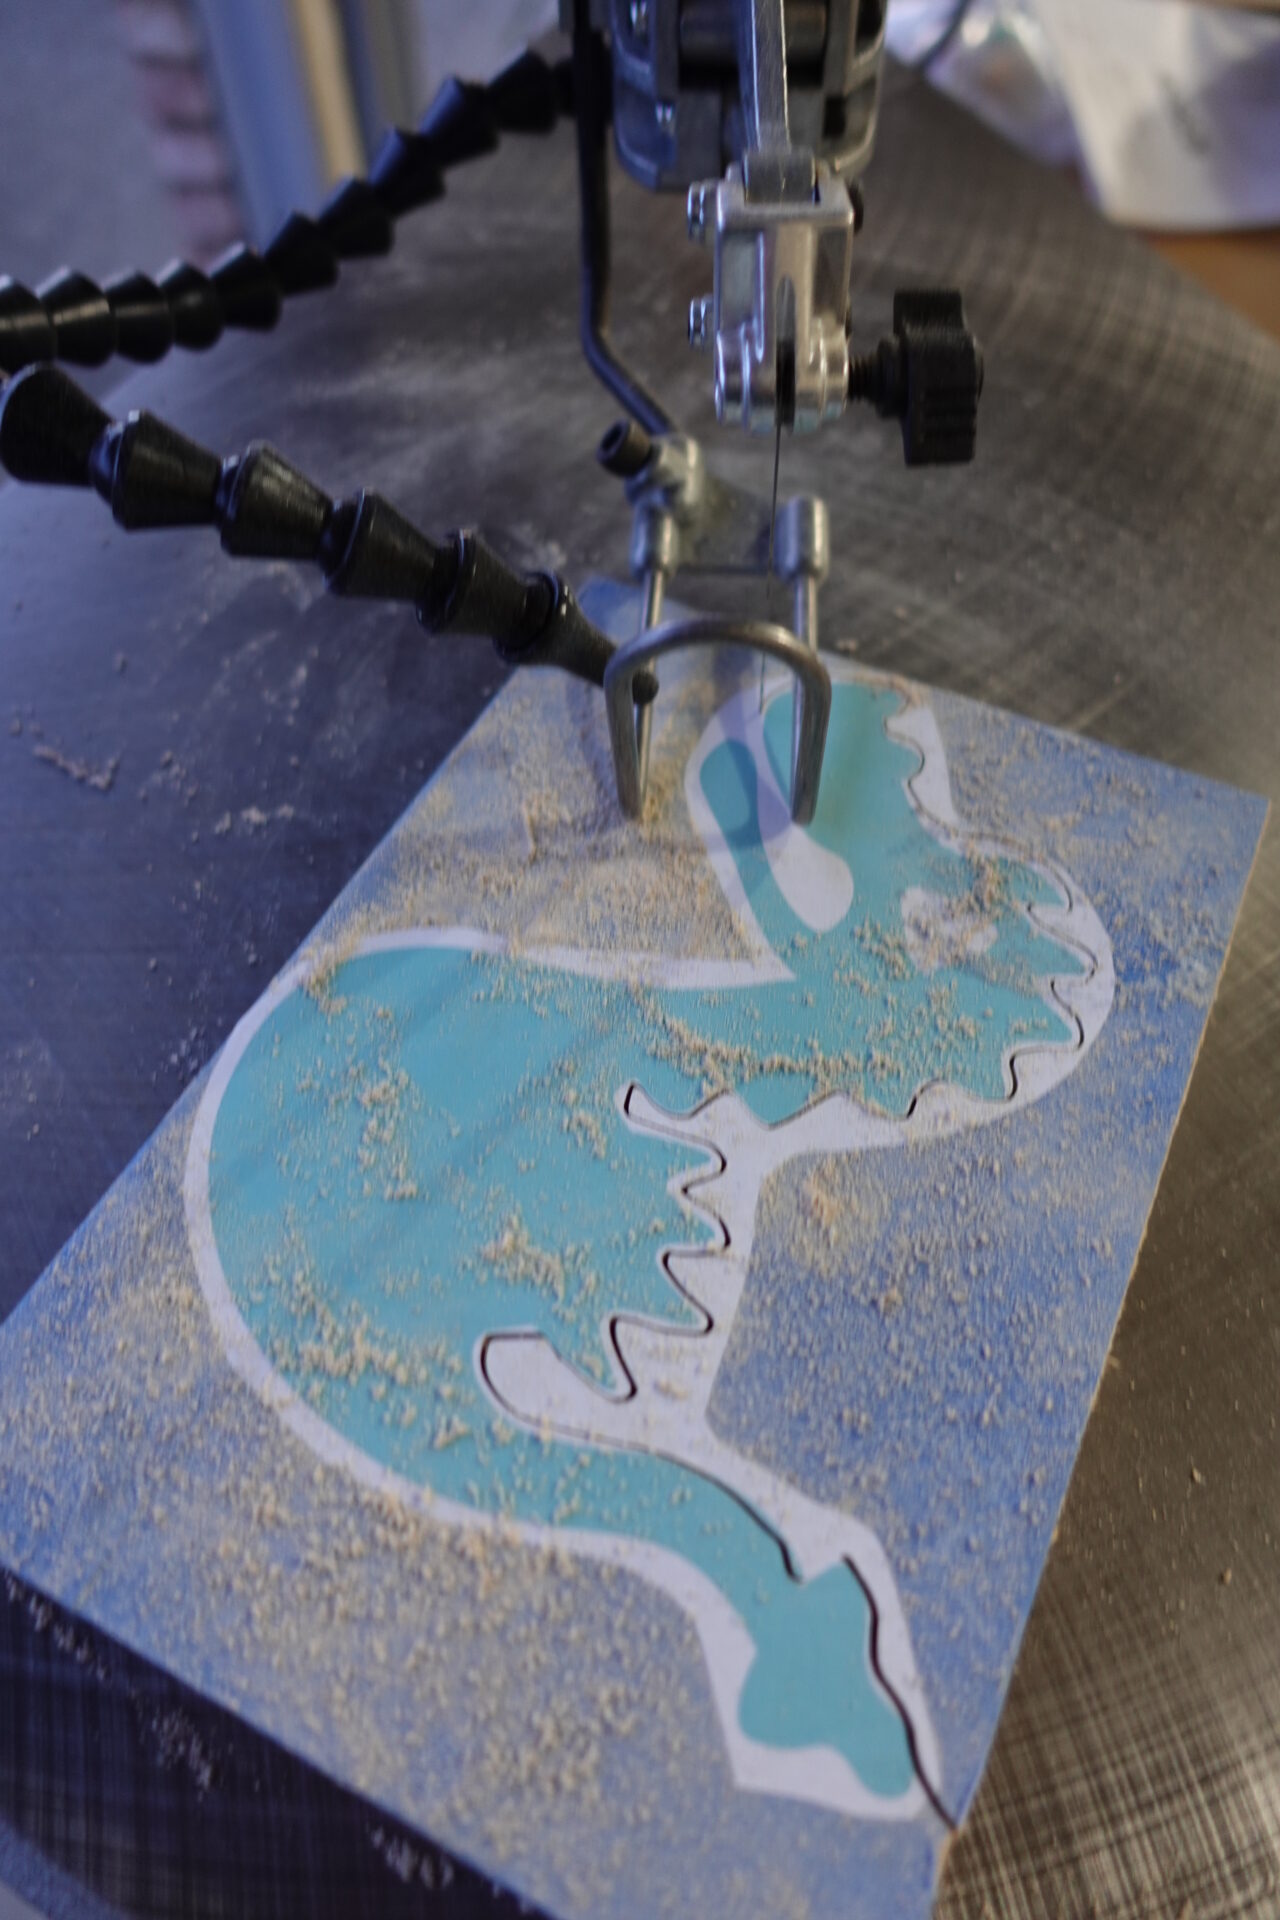 Cutting the parts with a scroll saw